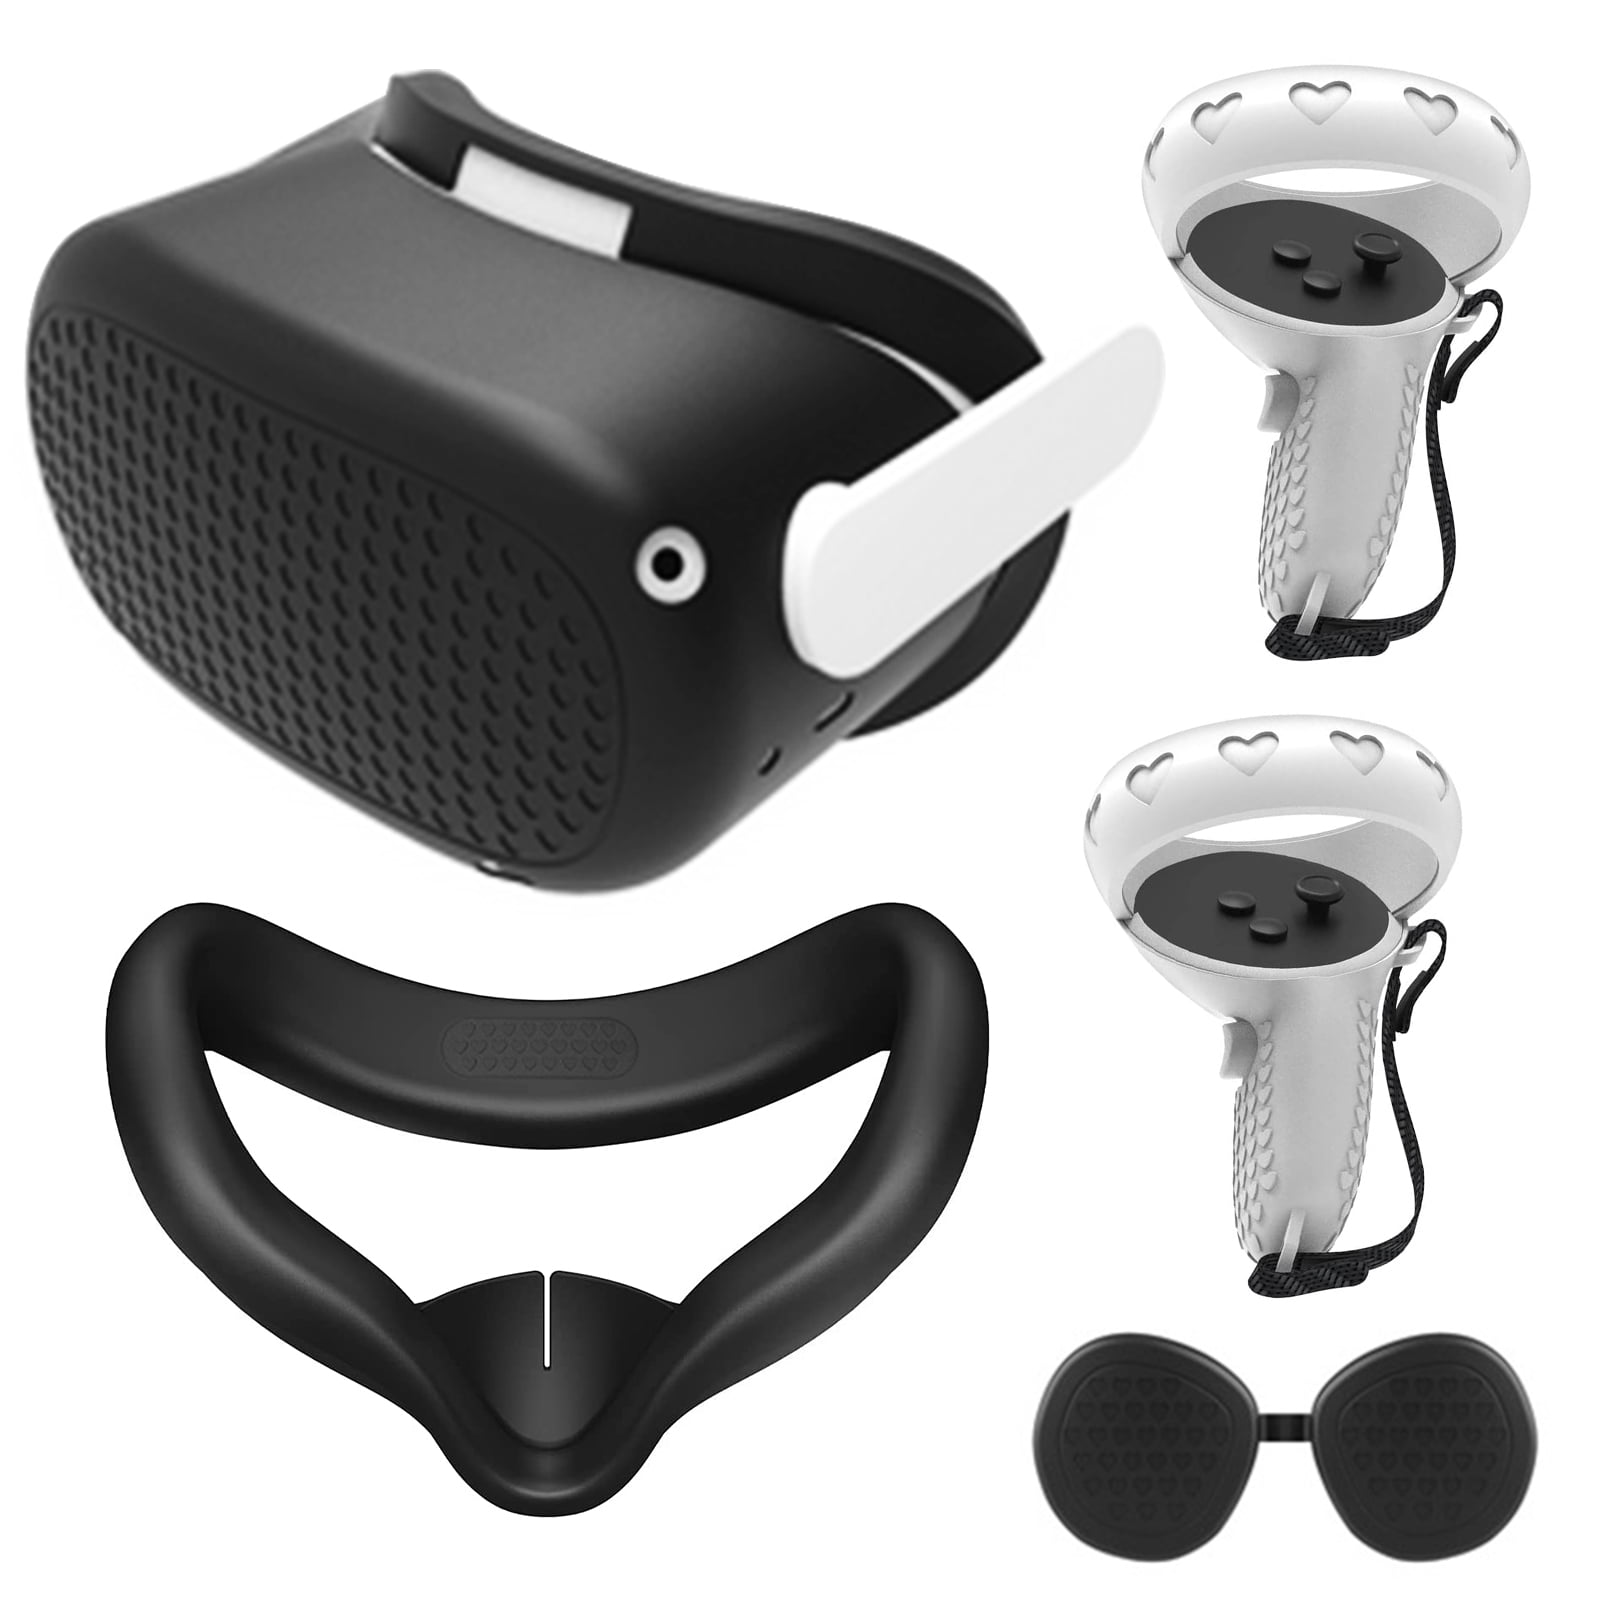 RHOTALL VR Headset Cleaning Accessories Kit, 19 in 1 Lens Cleaning Case  Accessories with Lens Protector and Thumb Caps for Meta/Oculus Quest 3 & 2